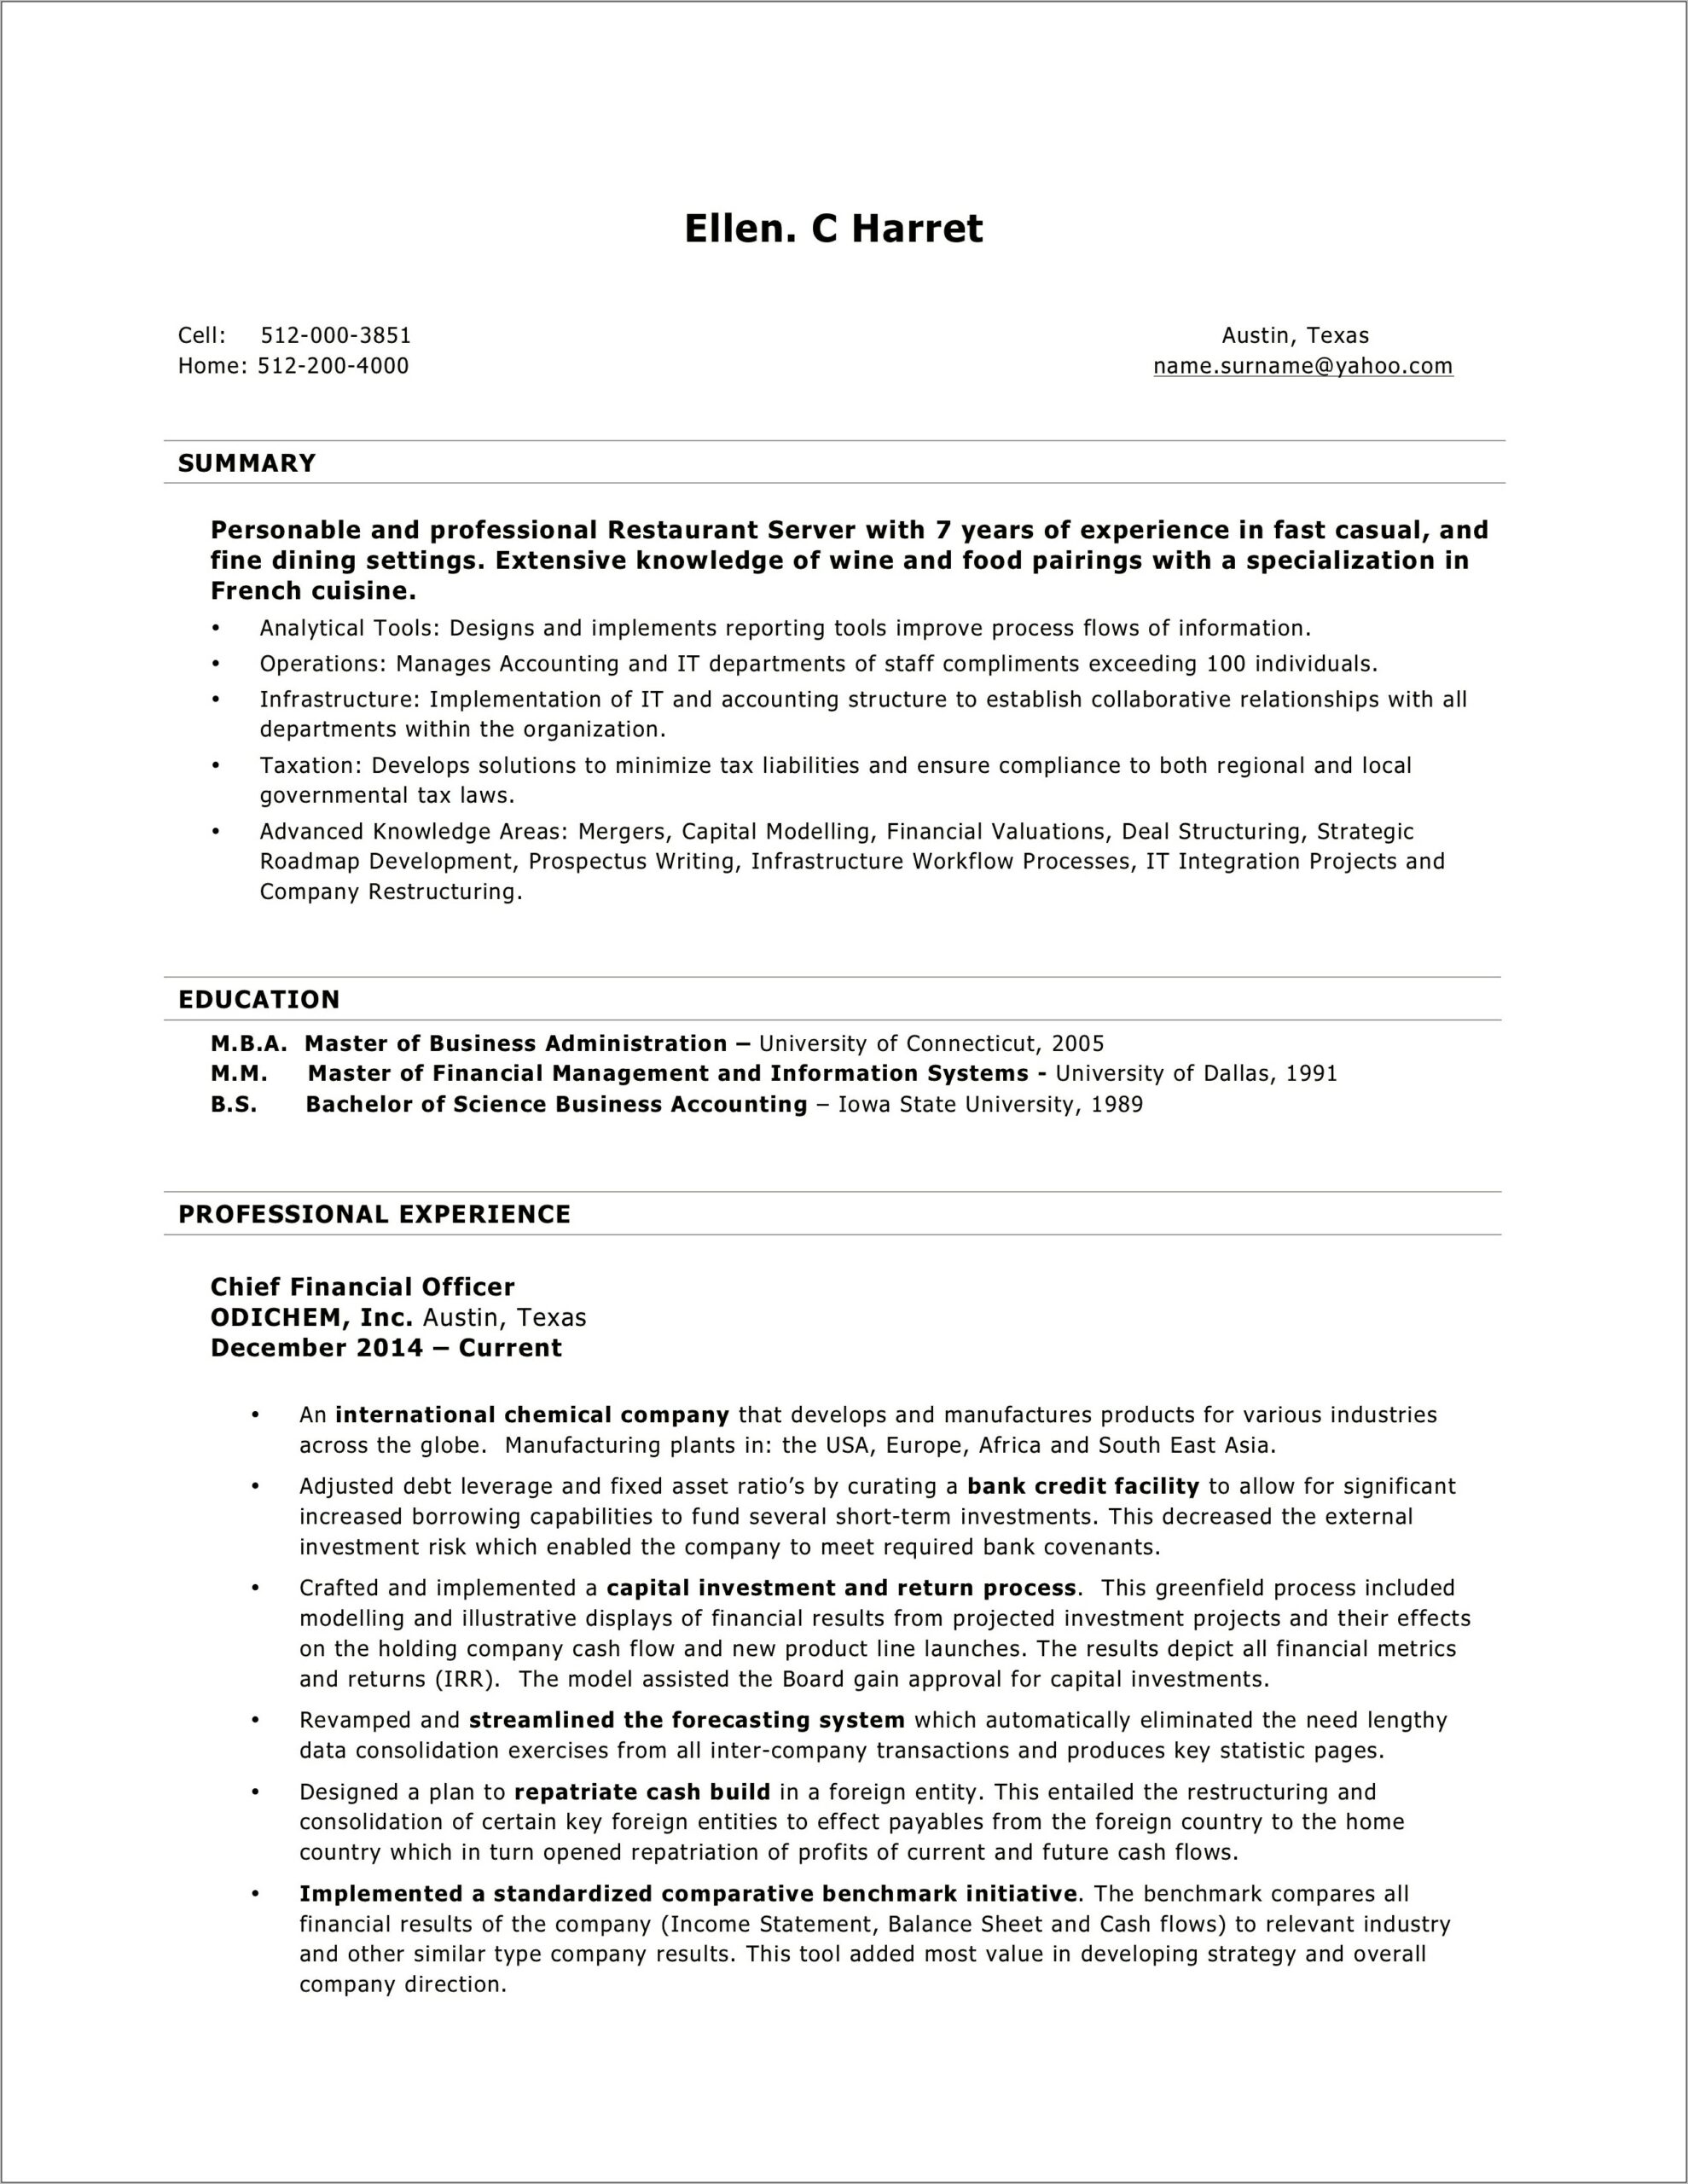 Microsoft Office Professional Resume Templates Download